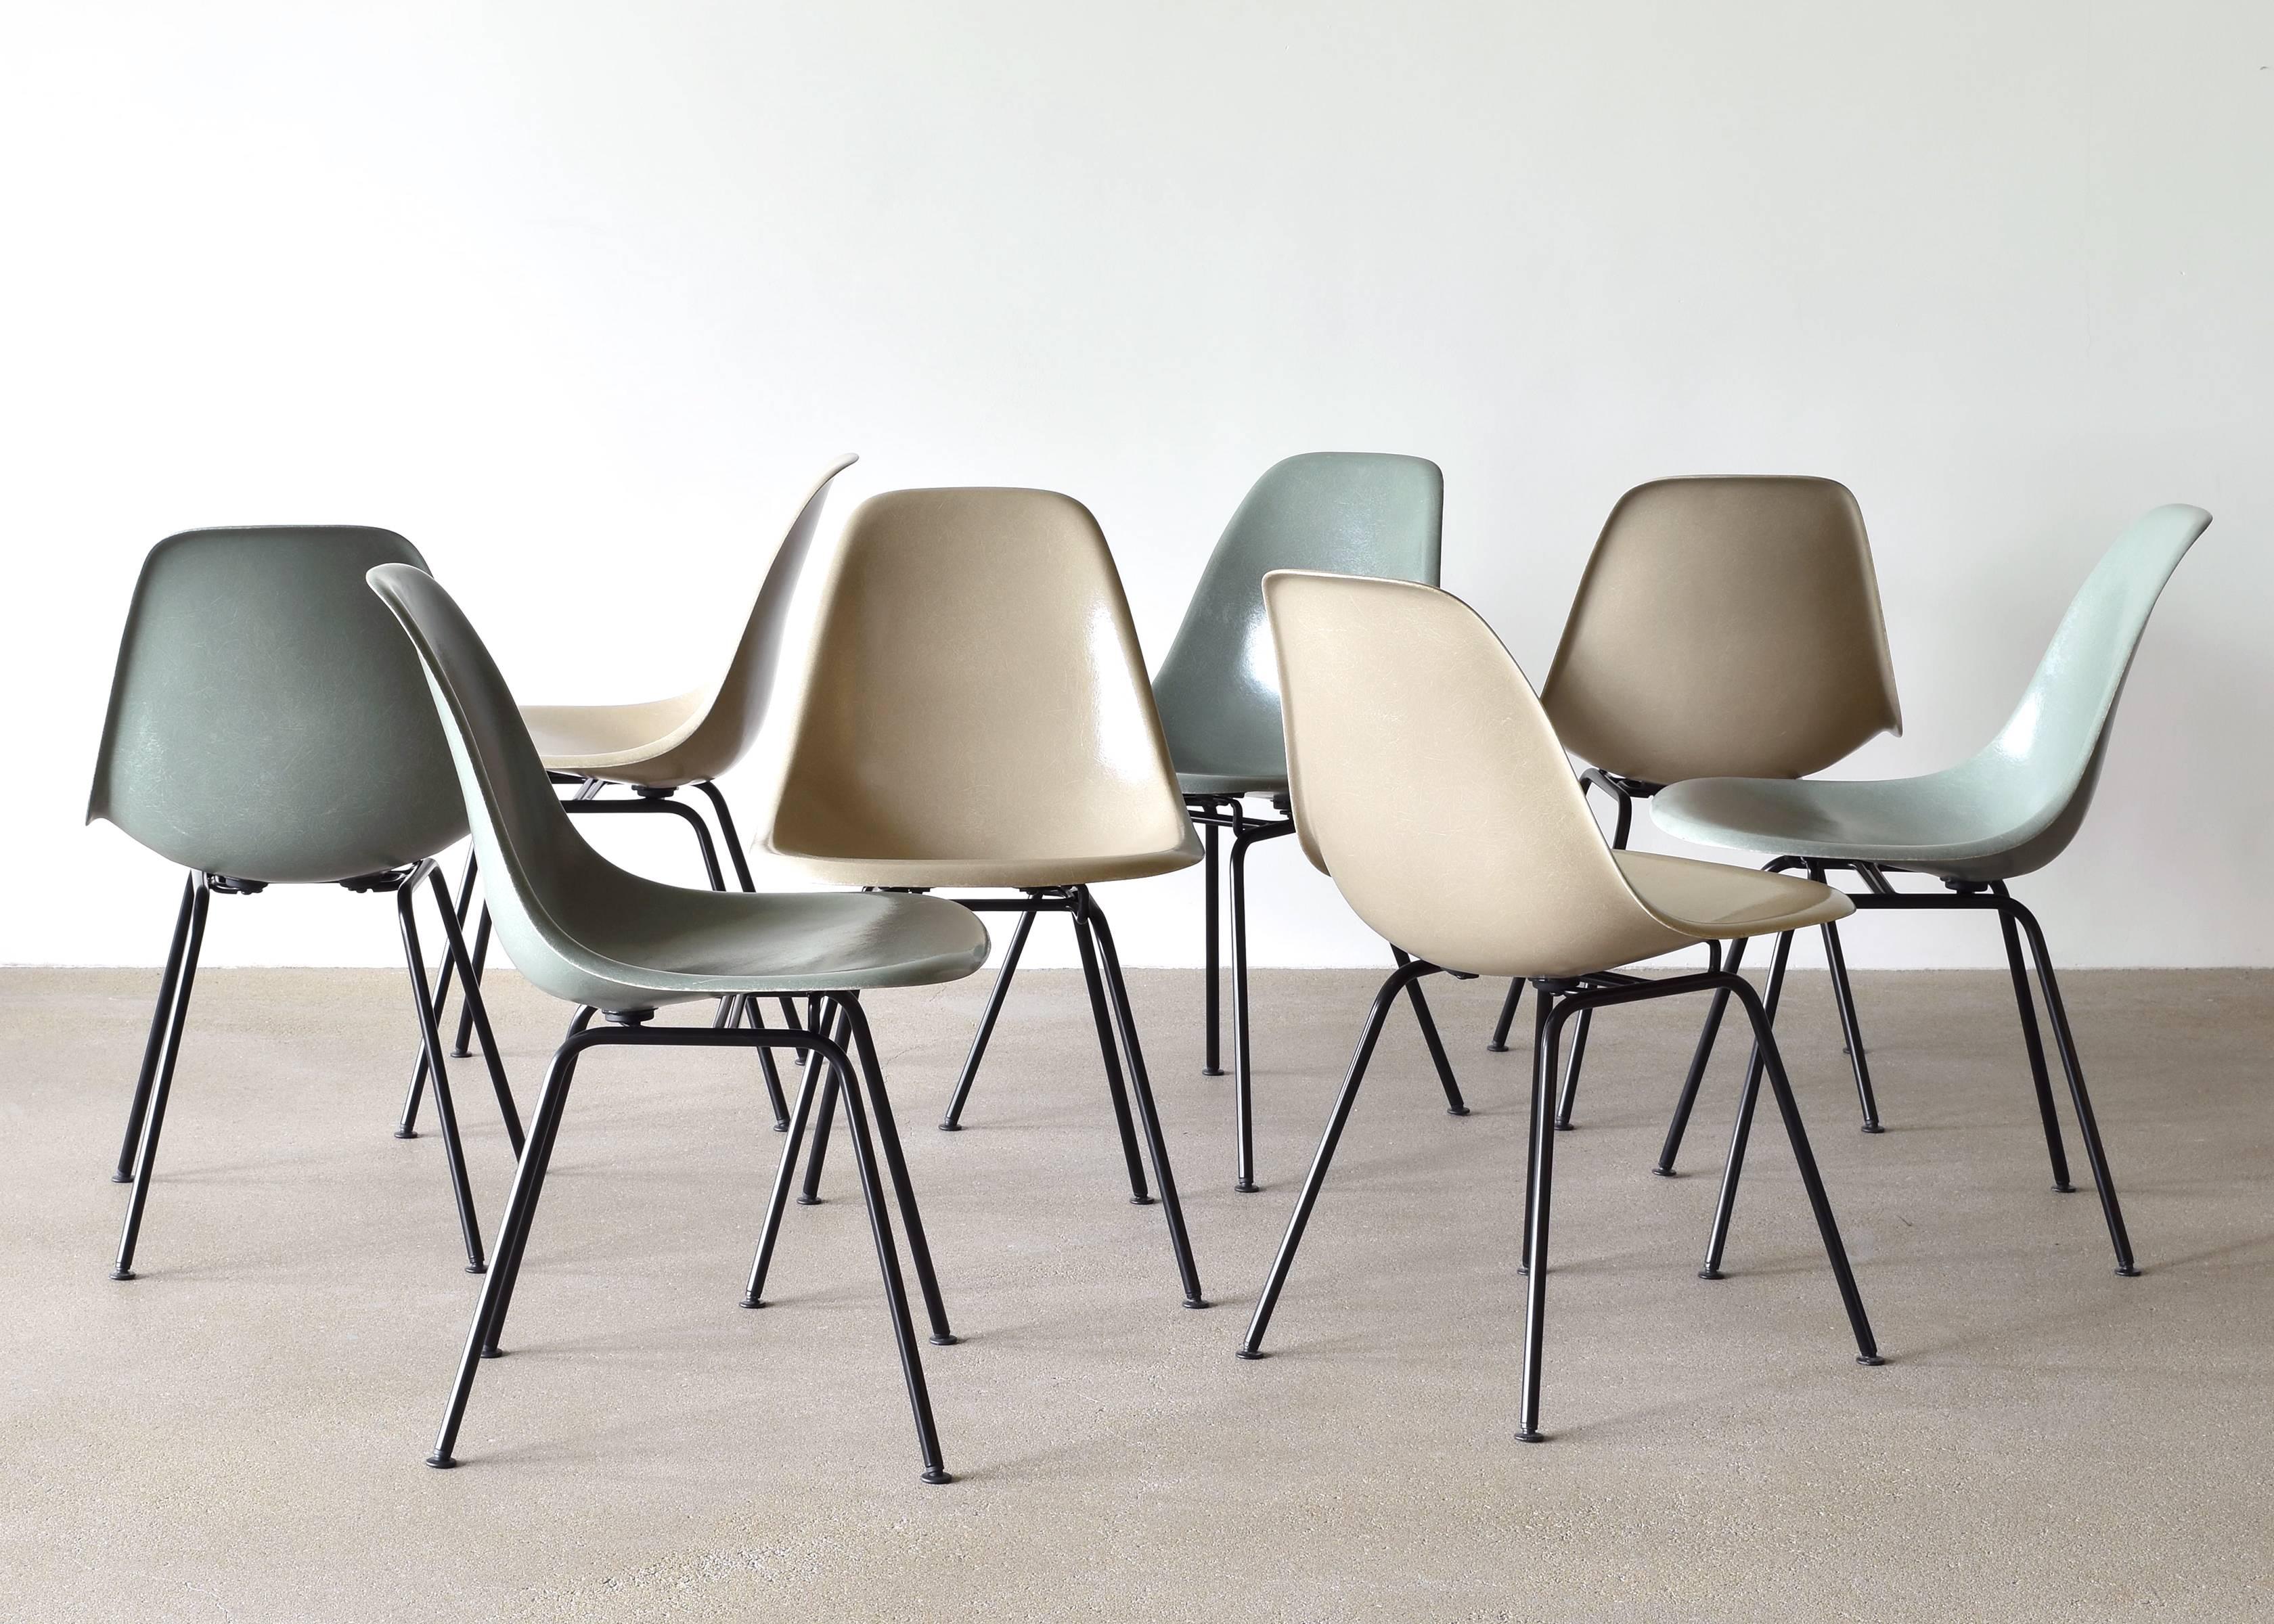 Beautiful iconic DSX chairs in natural colors: Sea foam green and greige. Shells are in very good or excellent condition with only slight traces of use. Replaced shock mounts which guarantee save usability for the next decades. Each chair is signed